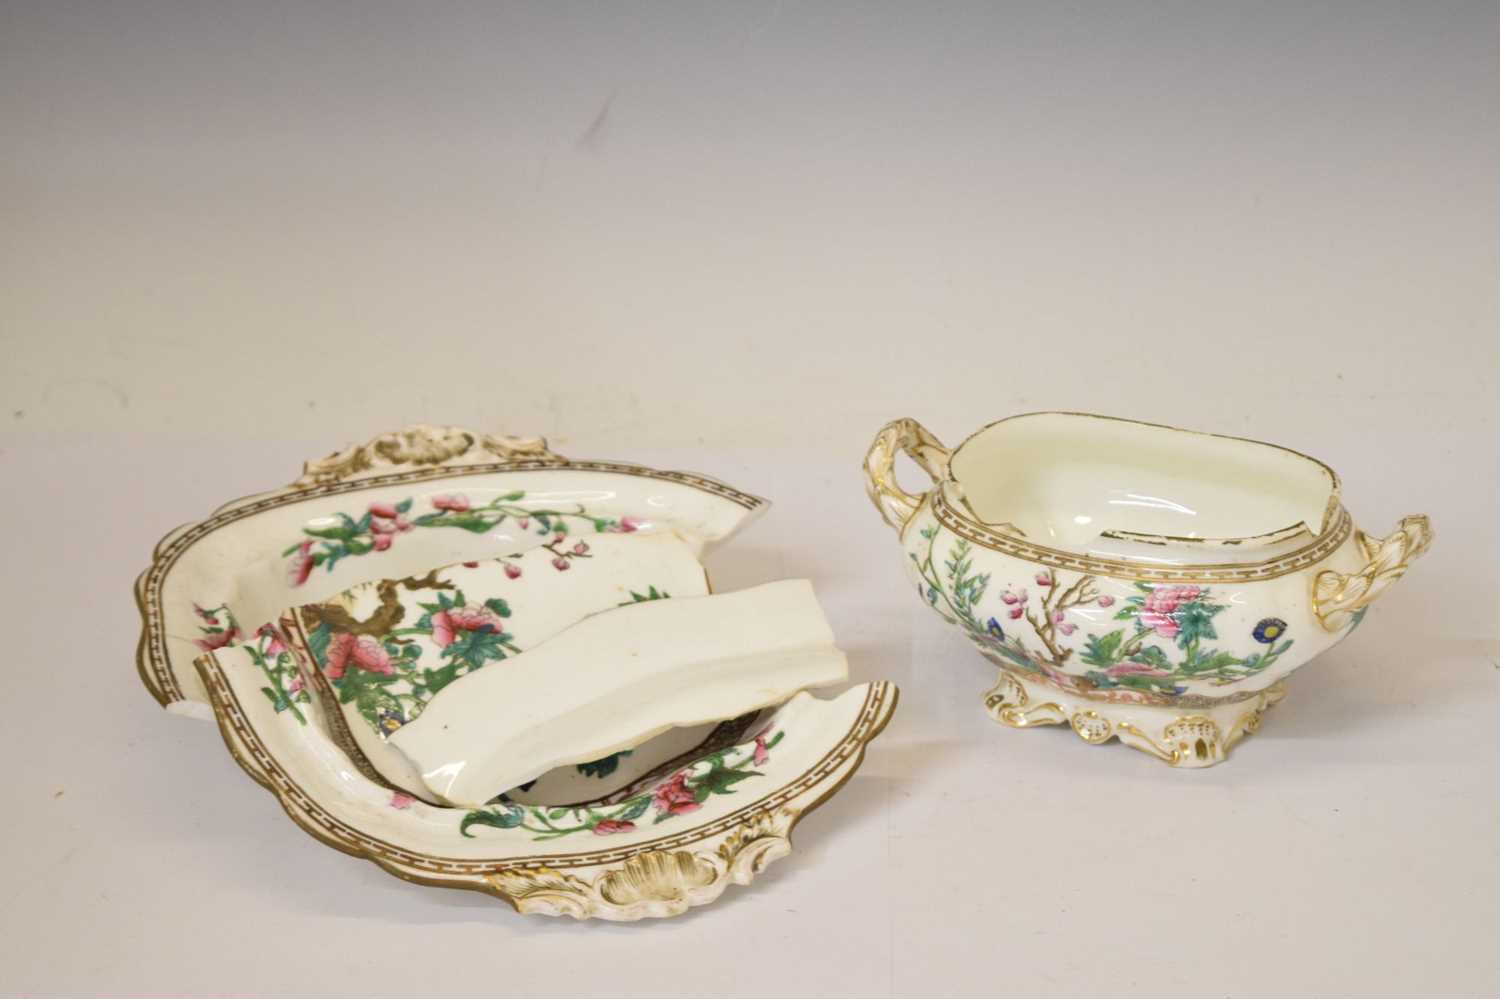 Late 19th century 'India Tree' part dinner service - Image 16 of 16